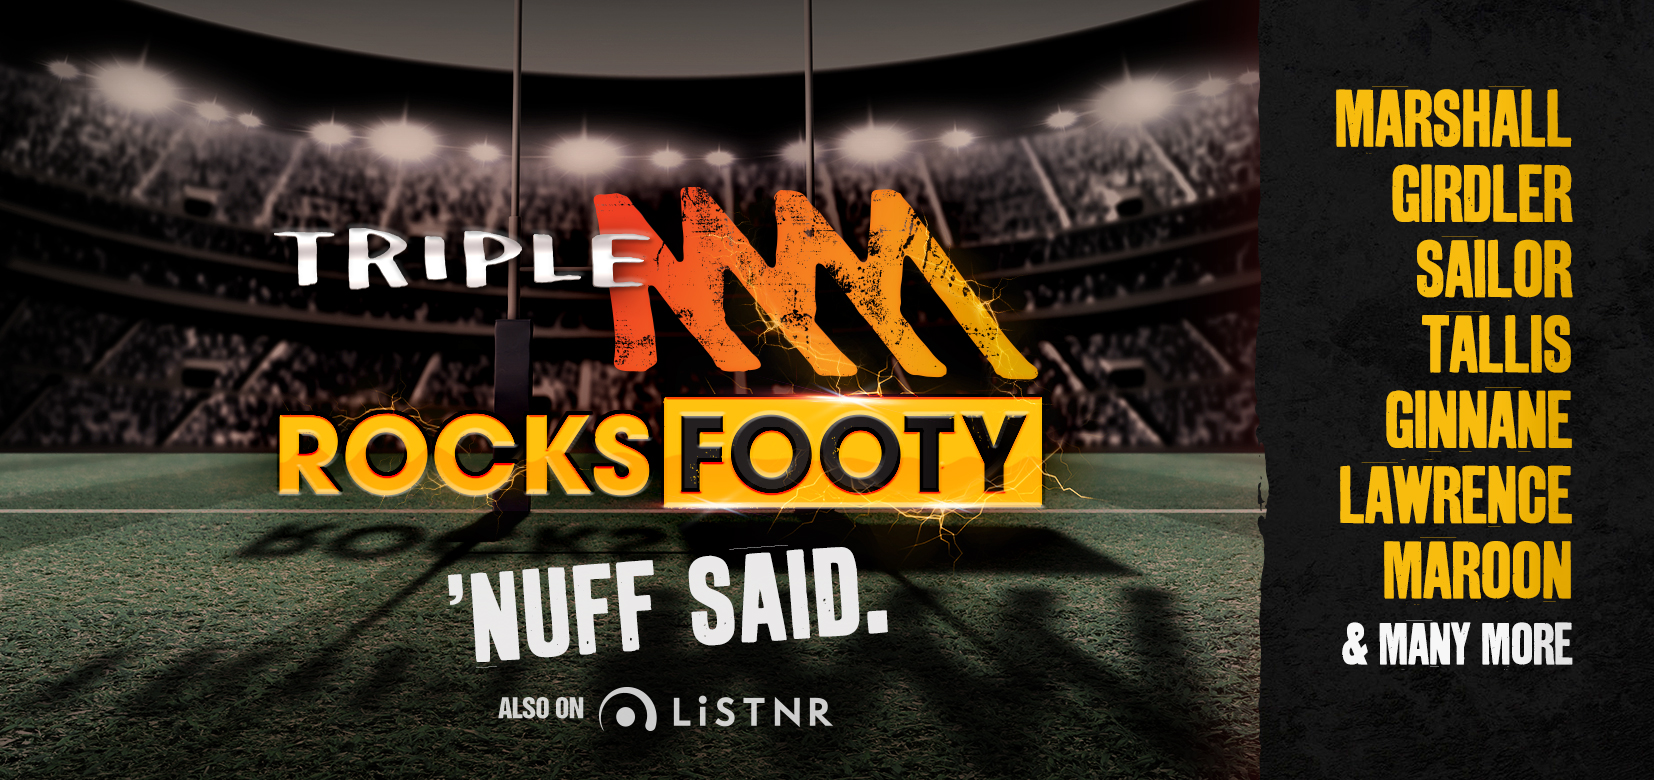 Would you like footy scores with that? SCA serves up world first audio campaign featuring live footy scores in ads, with partner McDonalds Southern Cross Austereo